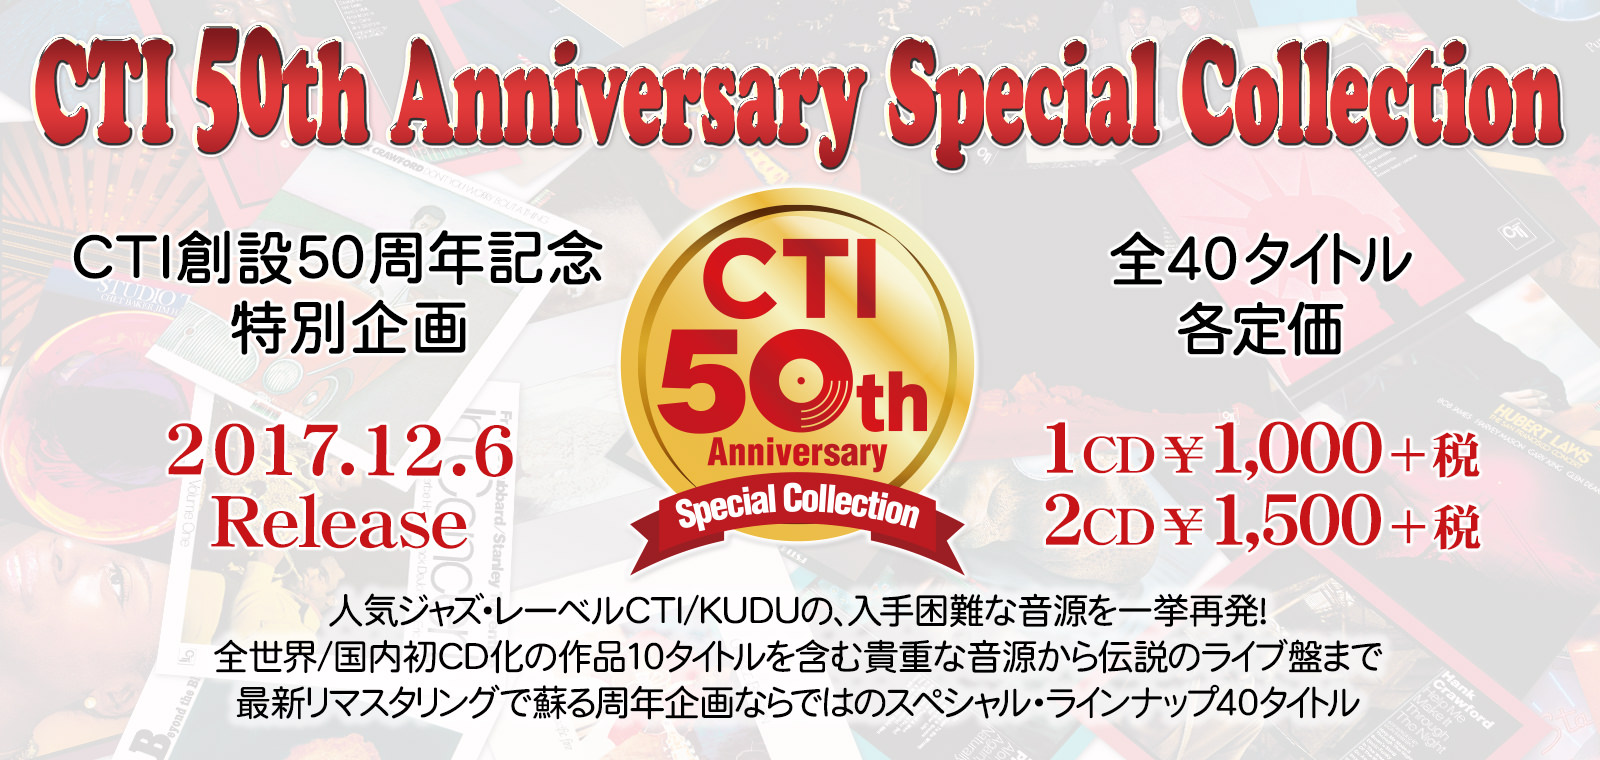 CTI 50th Anniversary Special Collection (2017) [FLAC 24bit/192kHz]